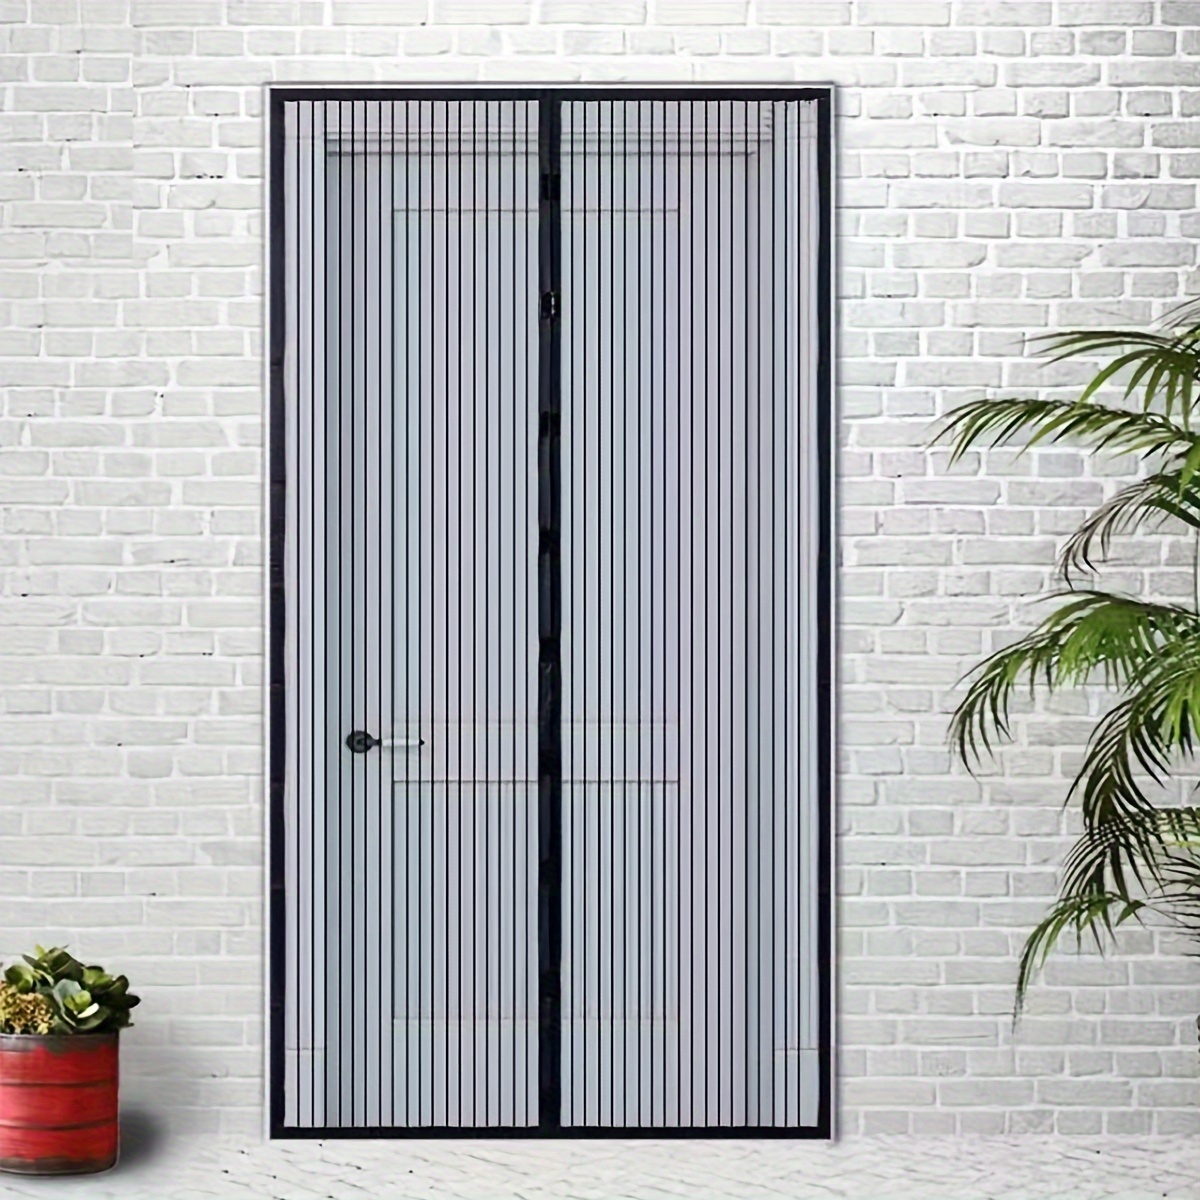 

Magnetic Mesh Screen Door Curtain - Summer Mosquito & Flying Insect Protection, Easy Wipe Clean, Versatile For Kitchen, Living Room, Bedroom - Classic Style Home Decor